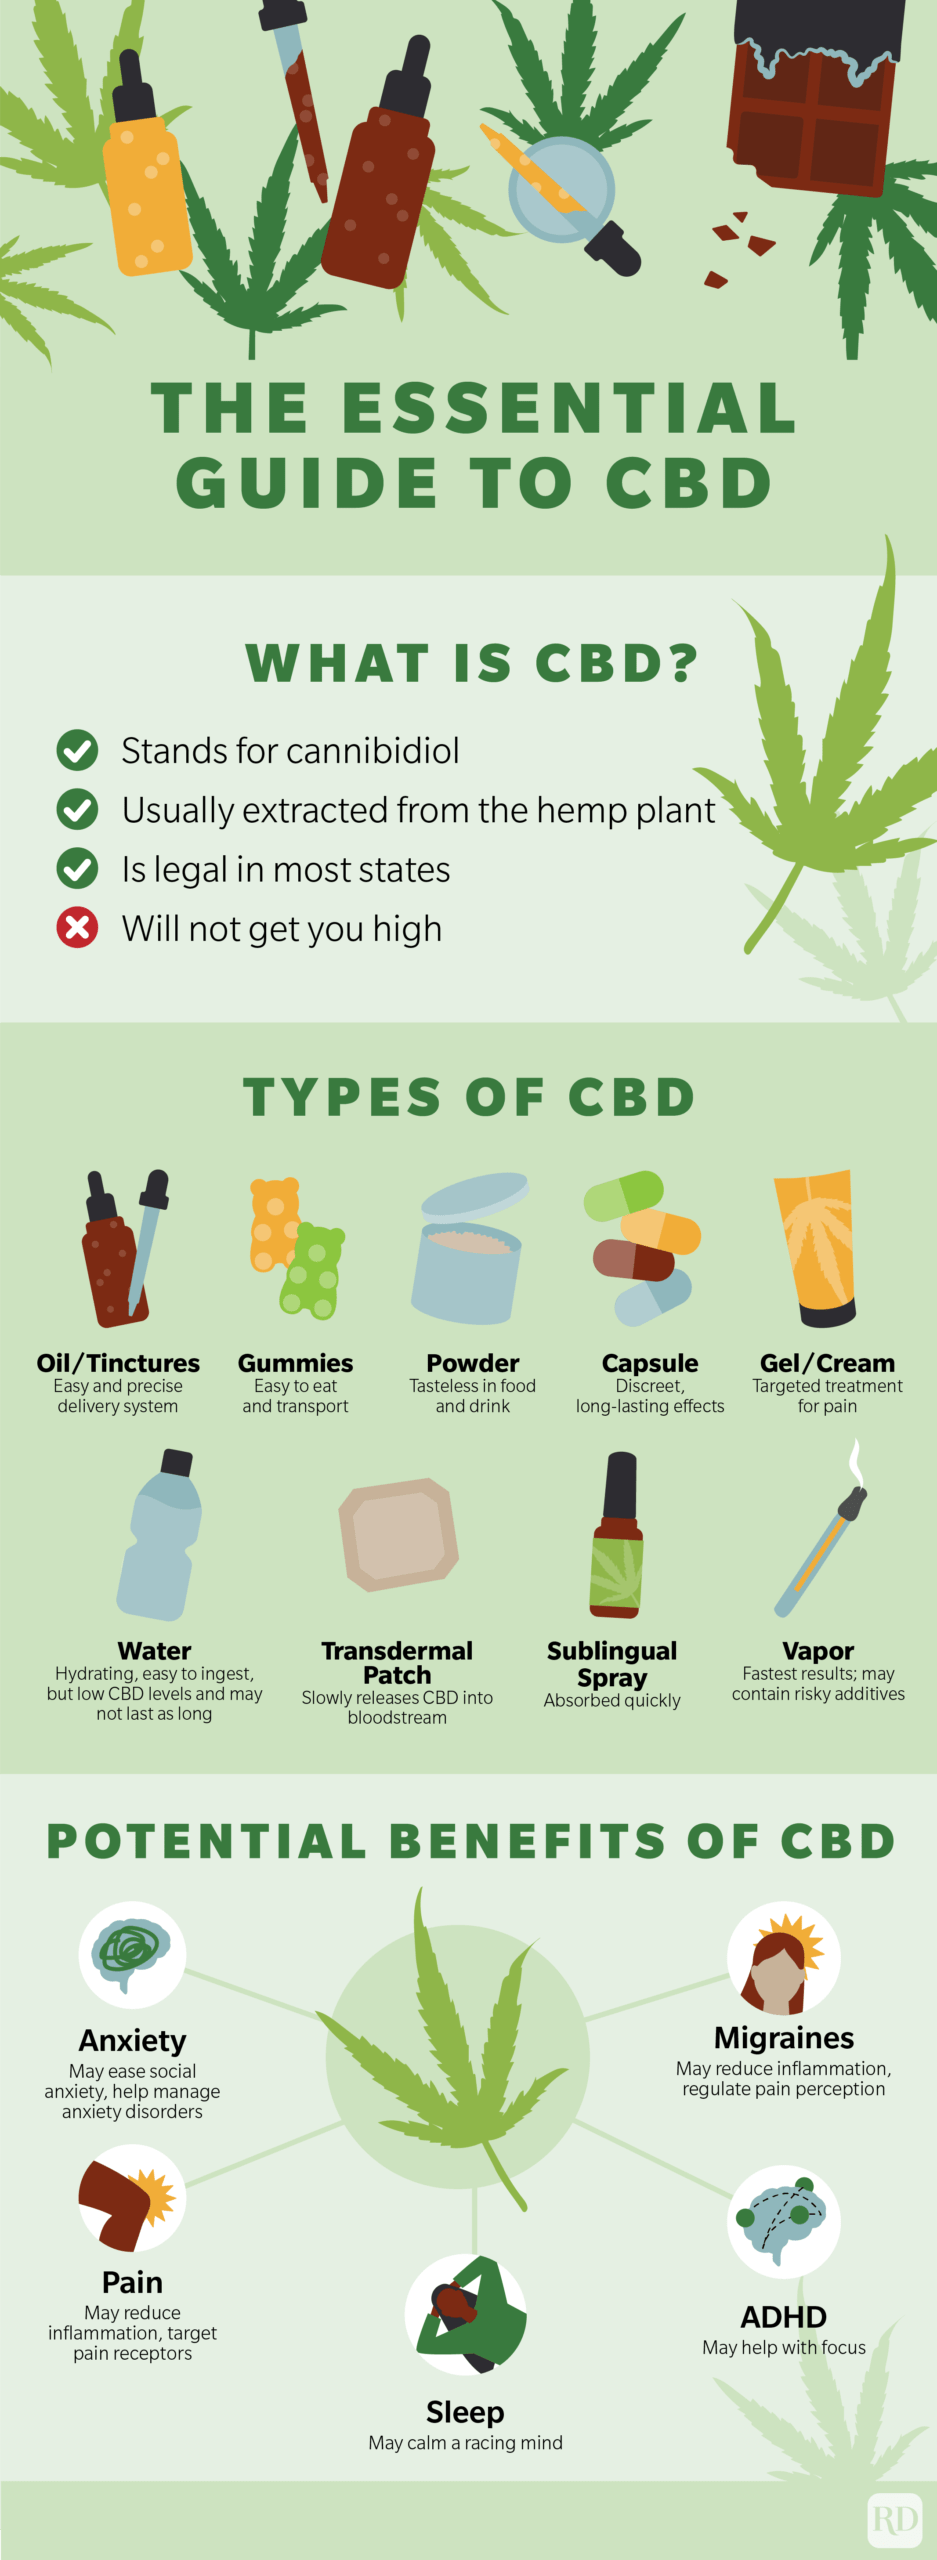 CBD Essentials Infographic with sections about What is CBD?, Types of CBD, and Potential Benefits of CBD